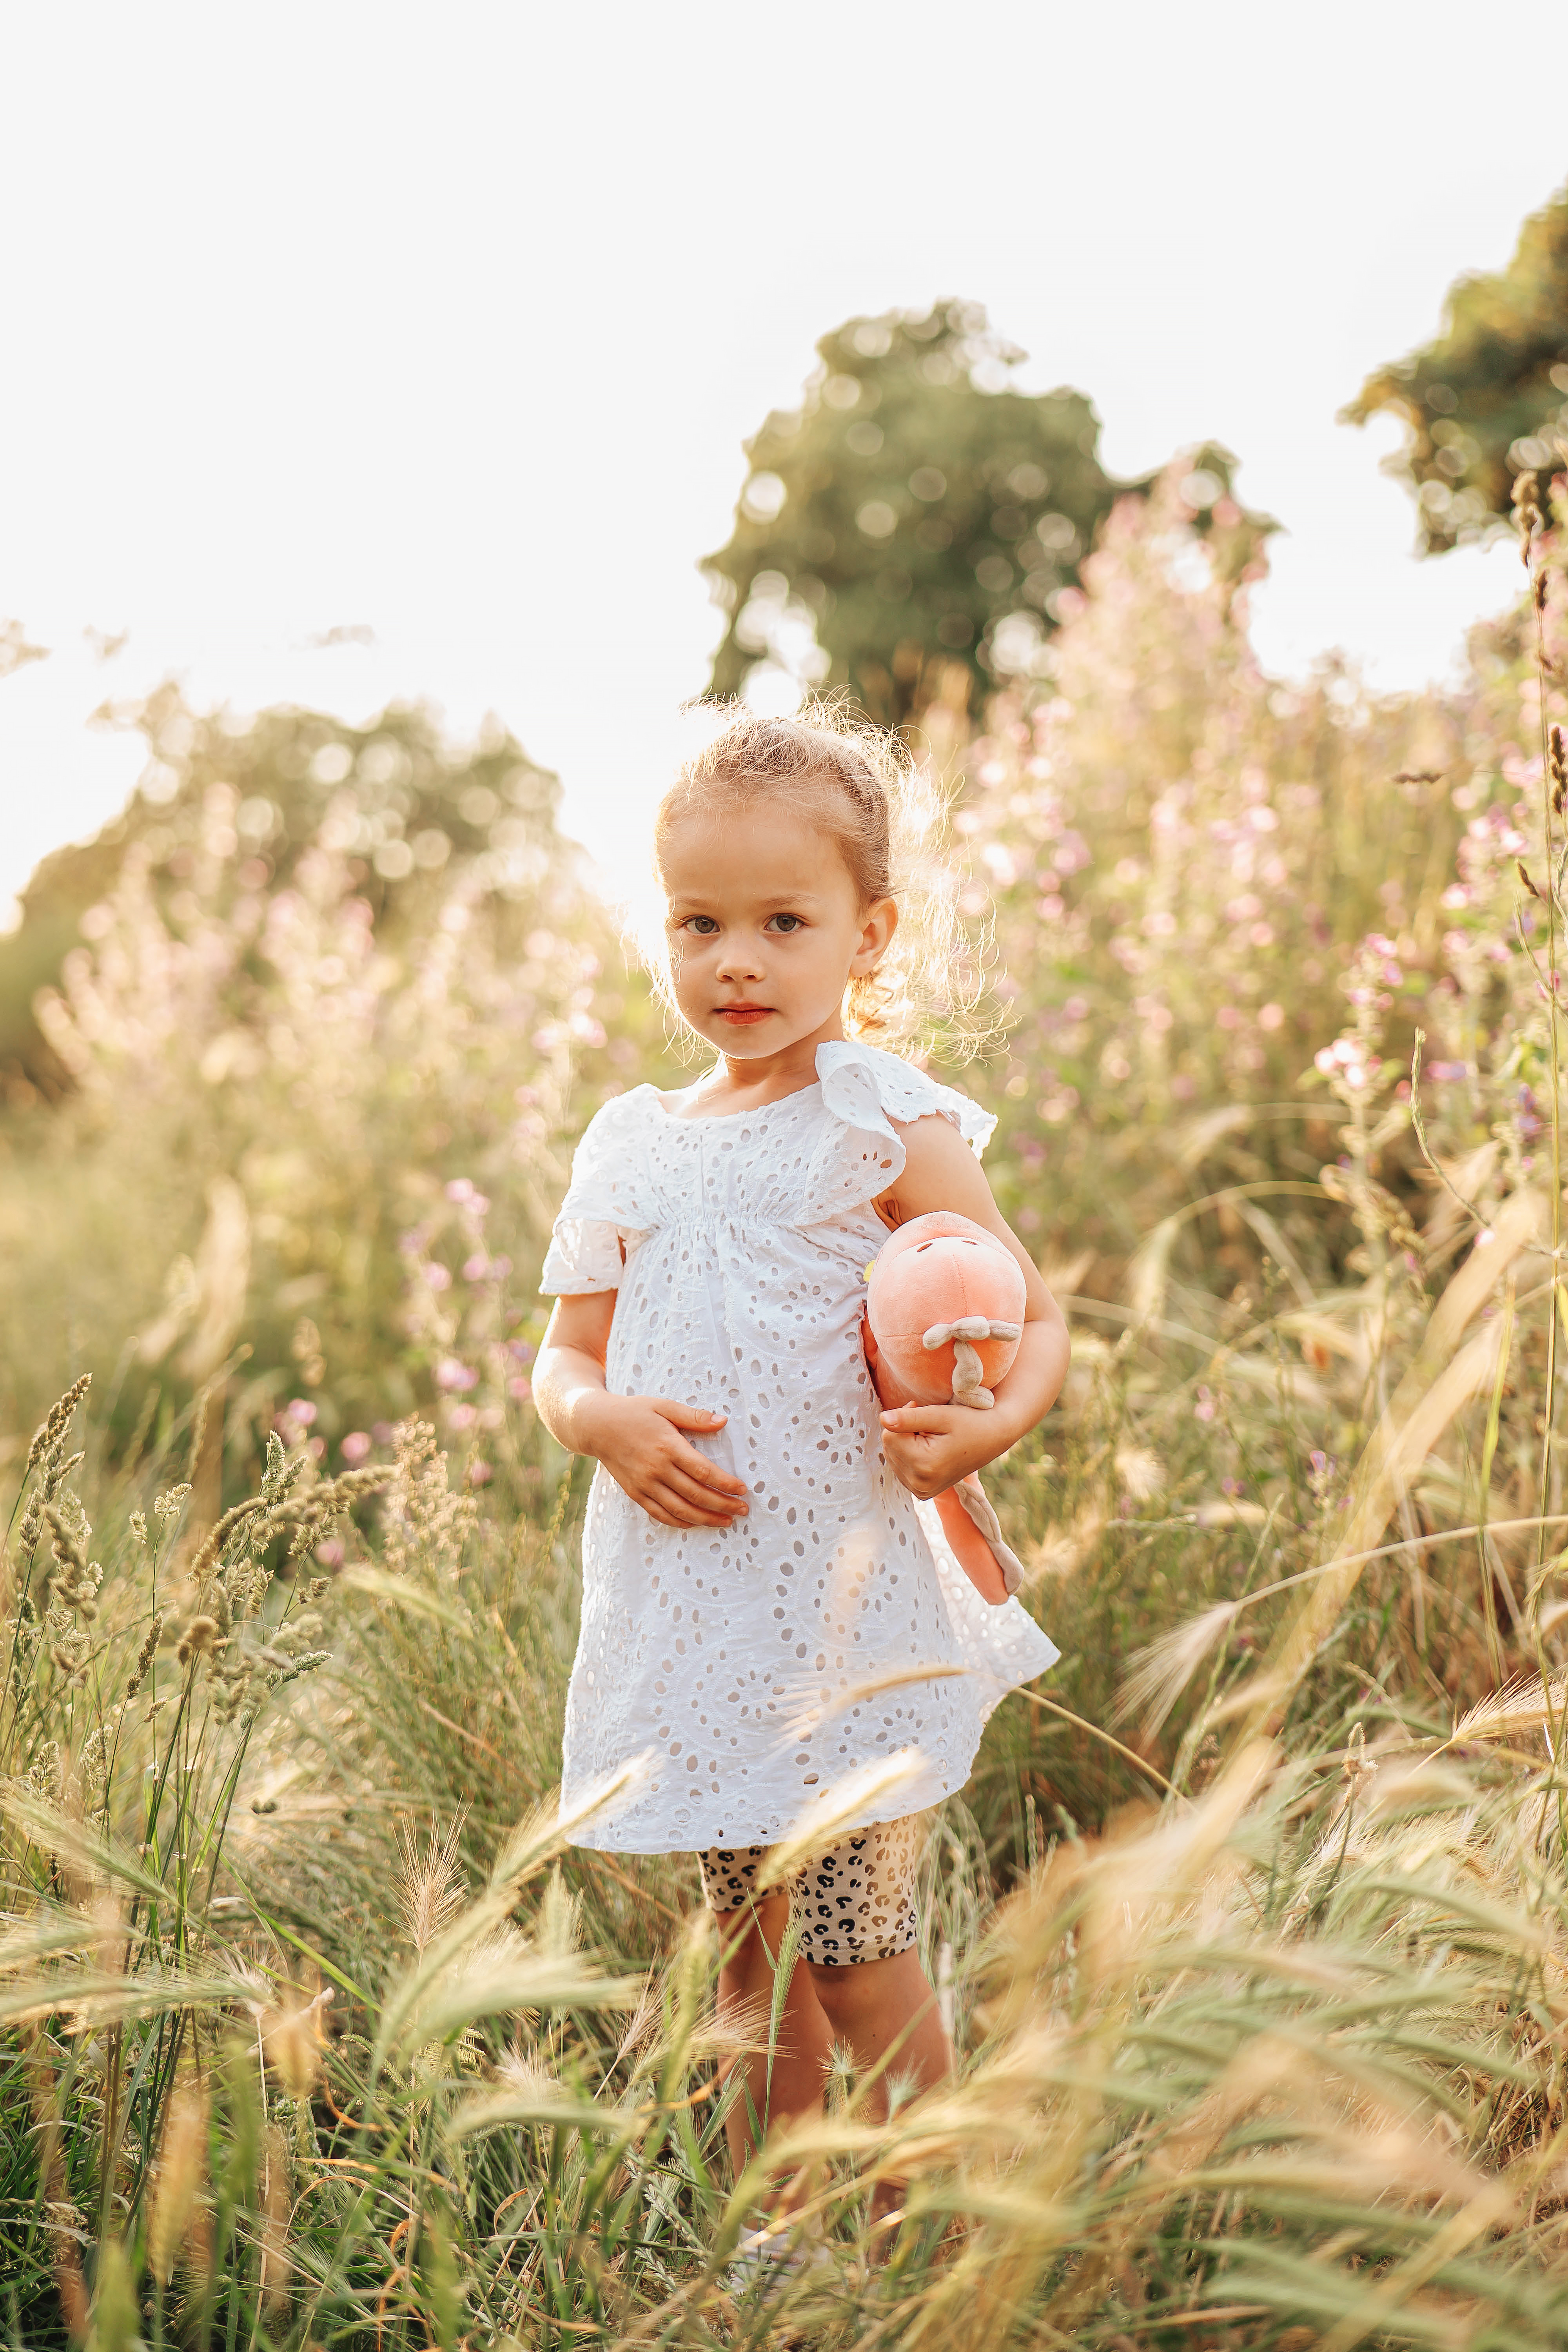 Small girl in high grass with a toy, sunset